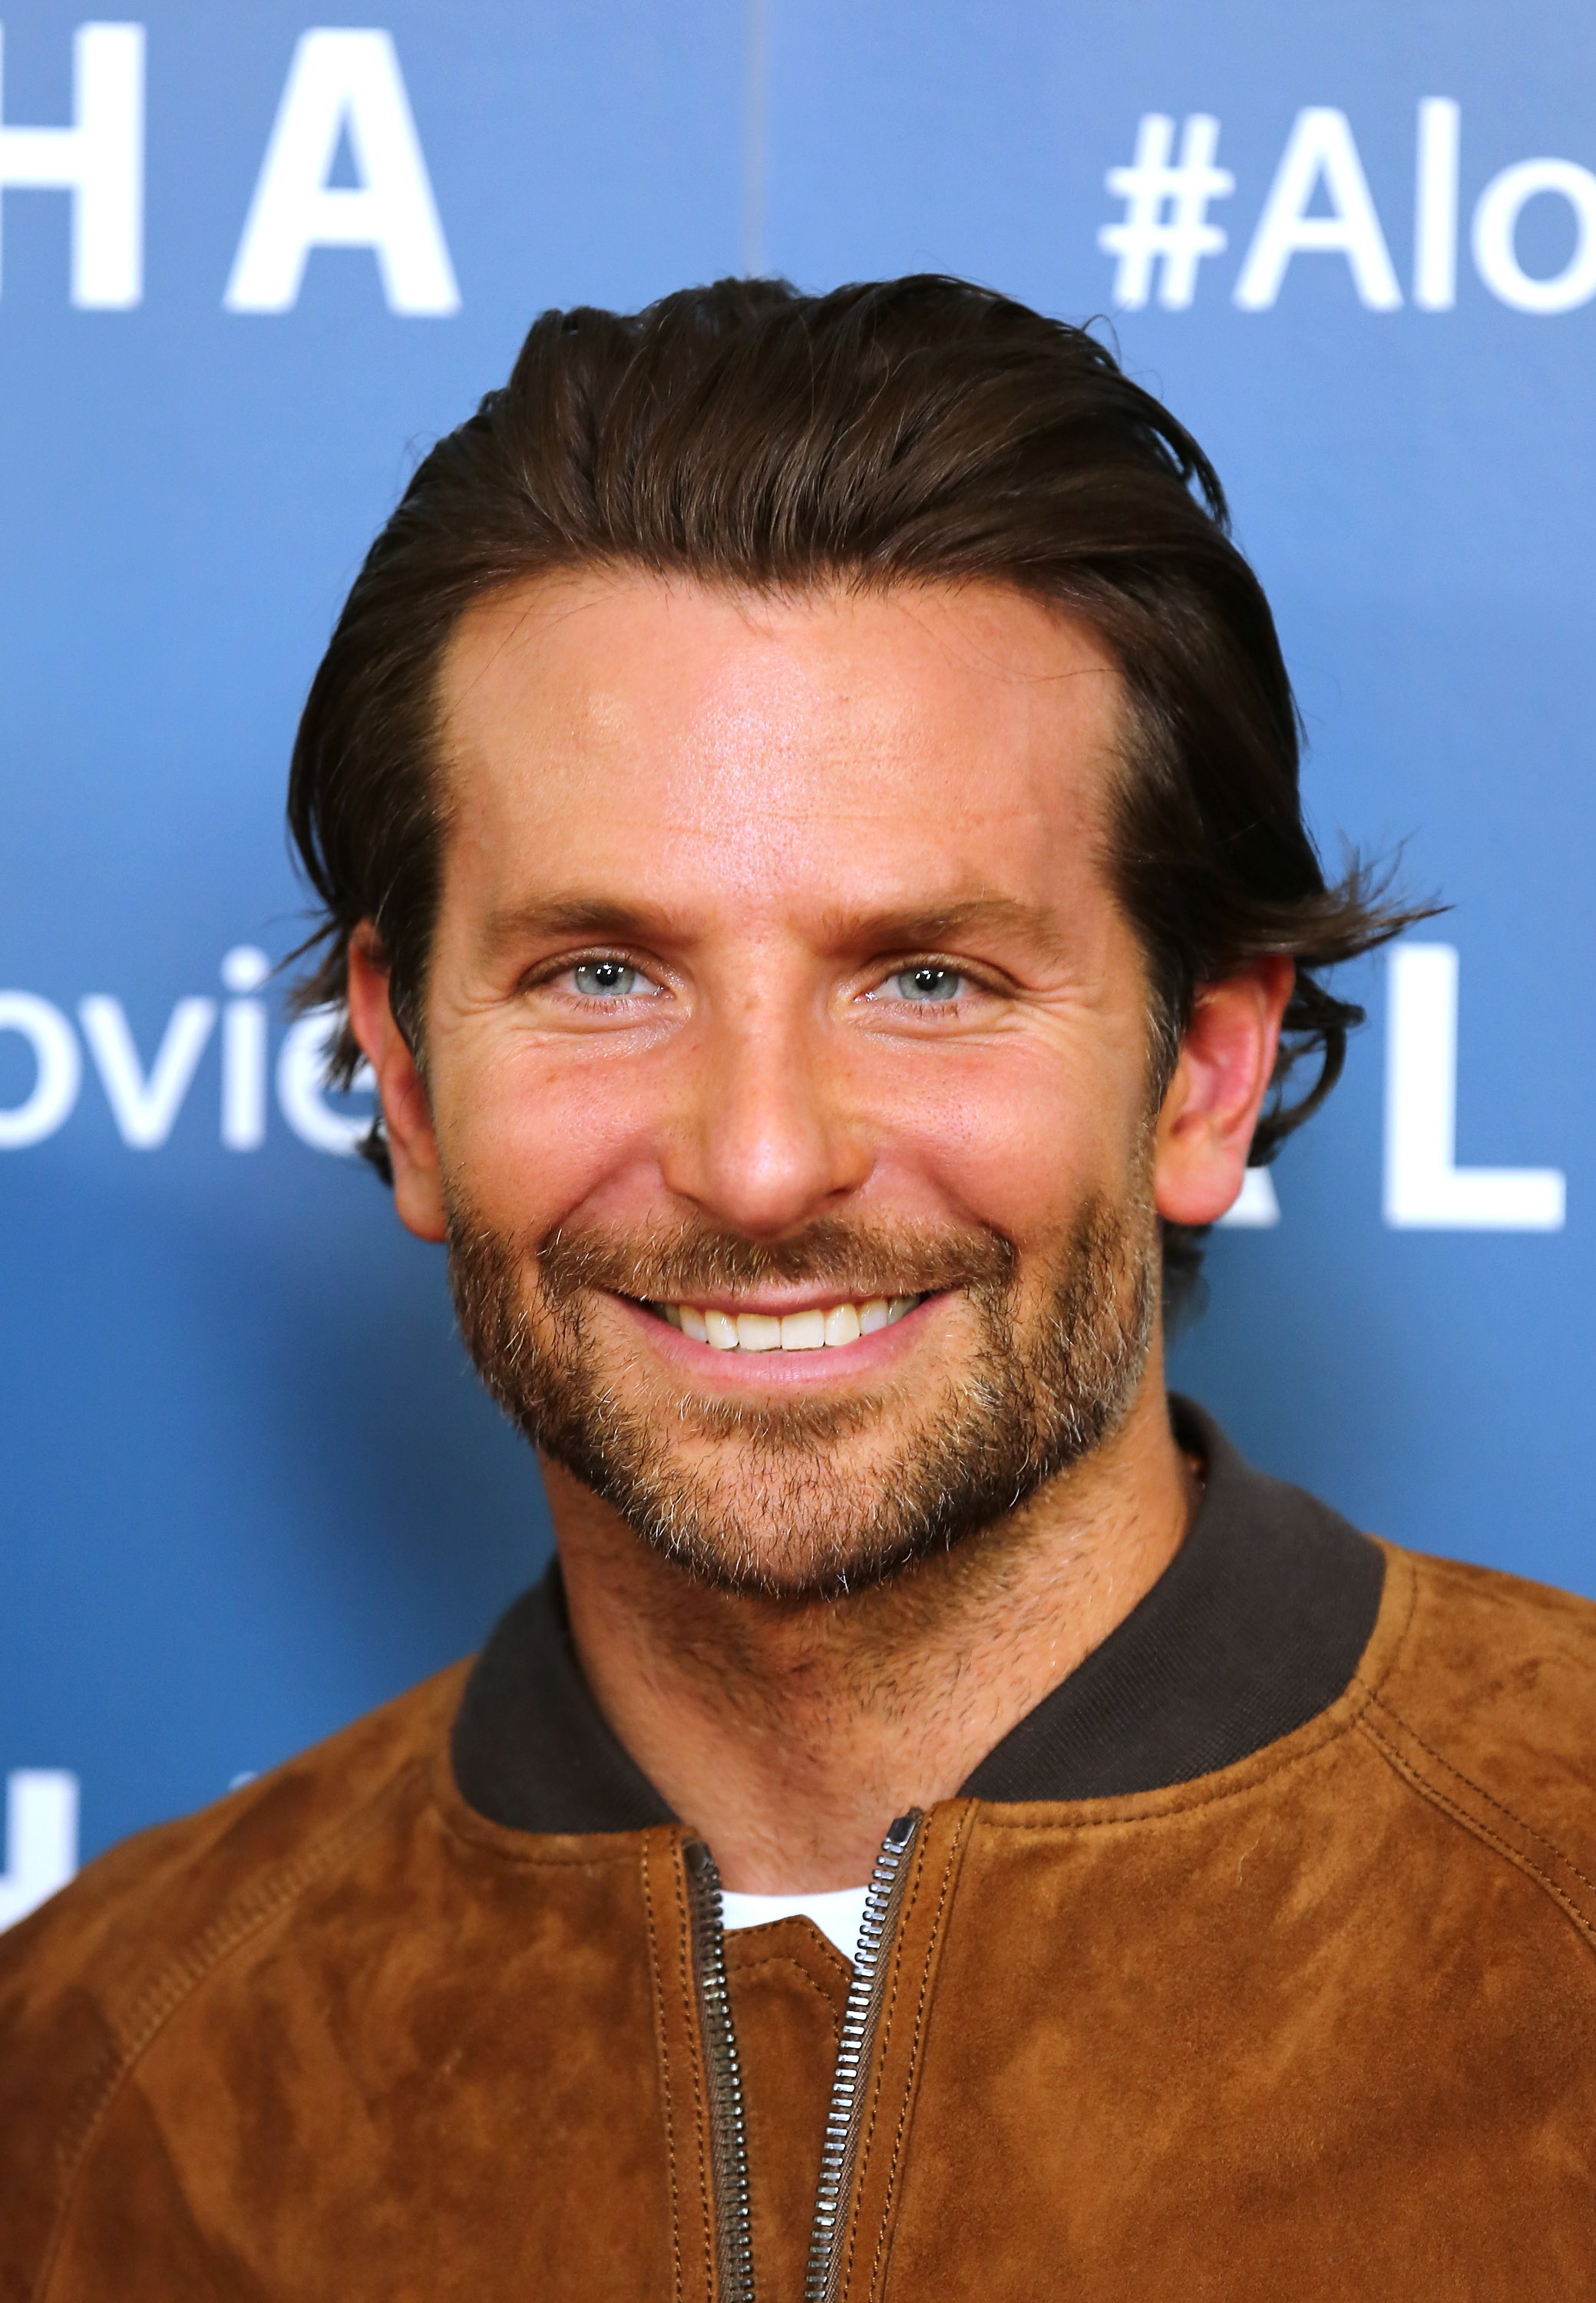 Bradley Cooper attends a VIP screening of "Aloha" at the Soho Hotel on May 16, 2015, in London, England. | Source: Getty Images